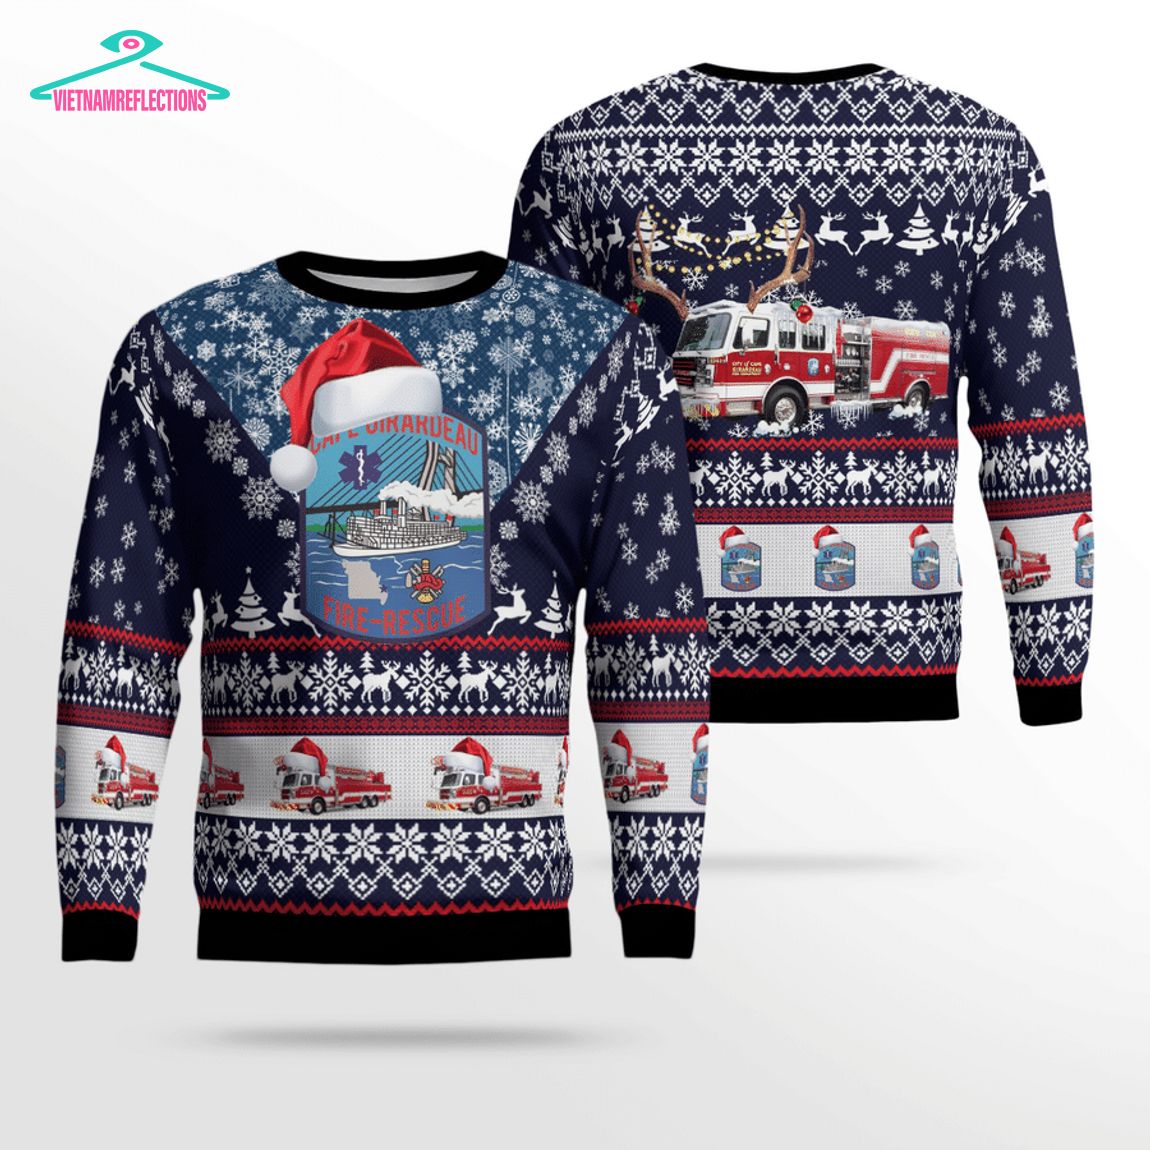 Cape Girardeau Fire Department 3D Christmas Sweater - My friend and partner